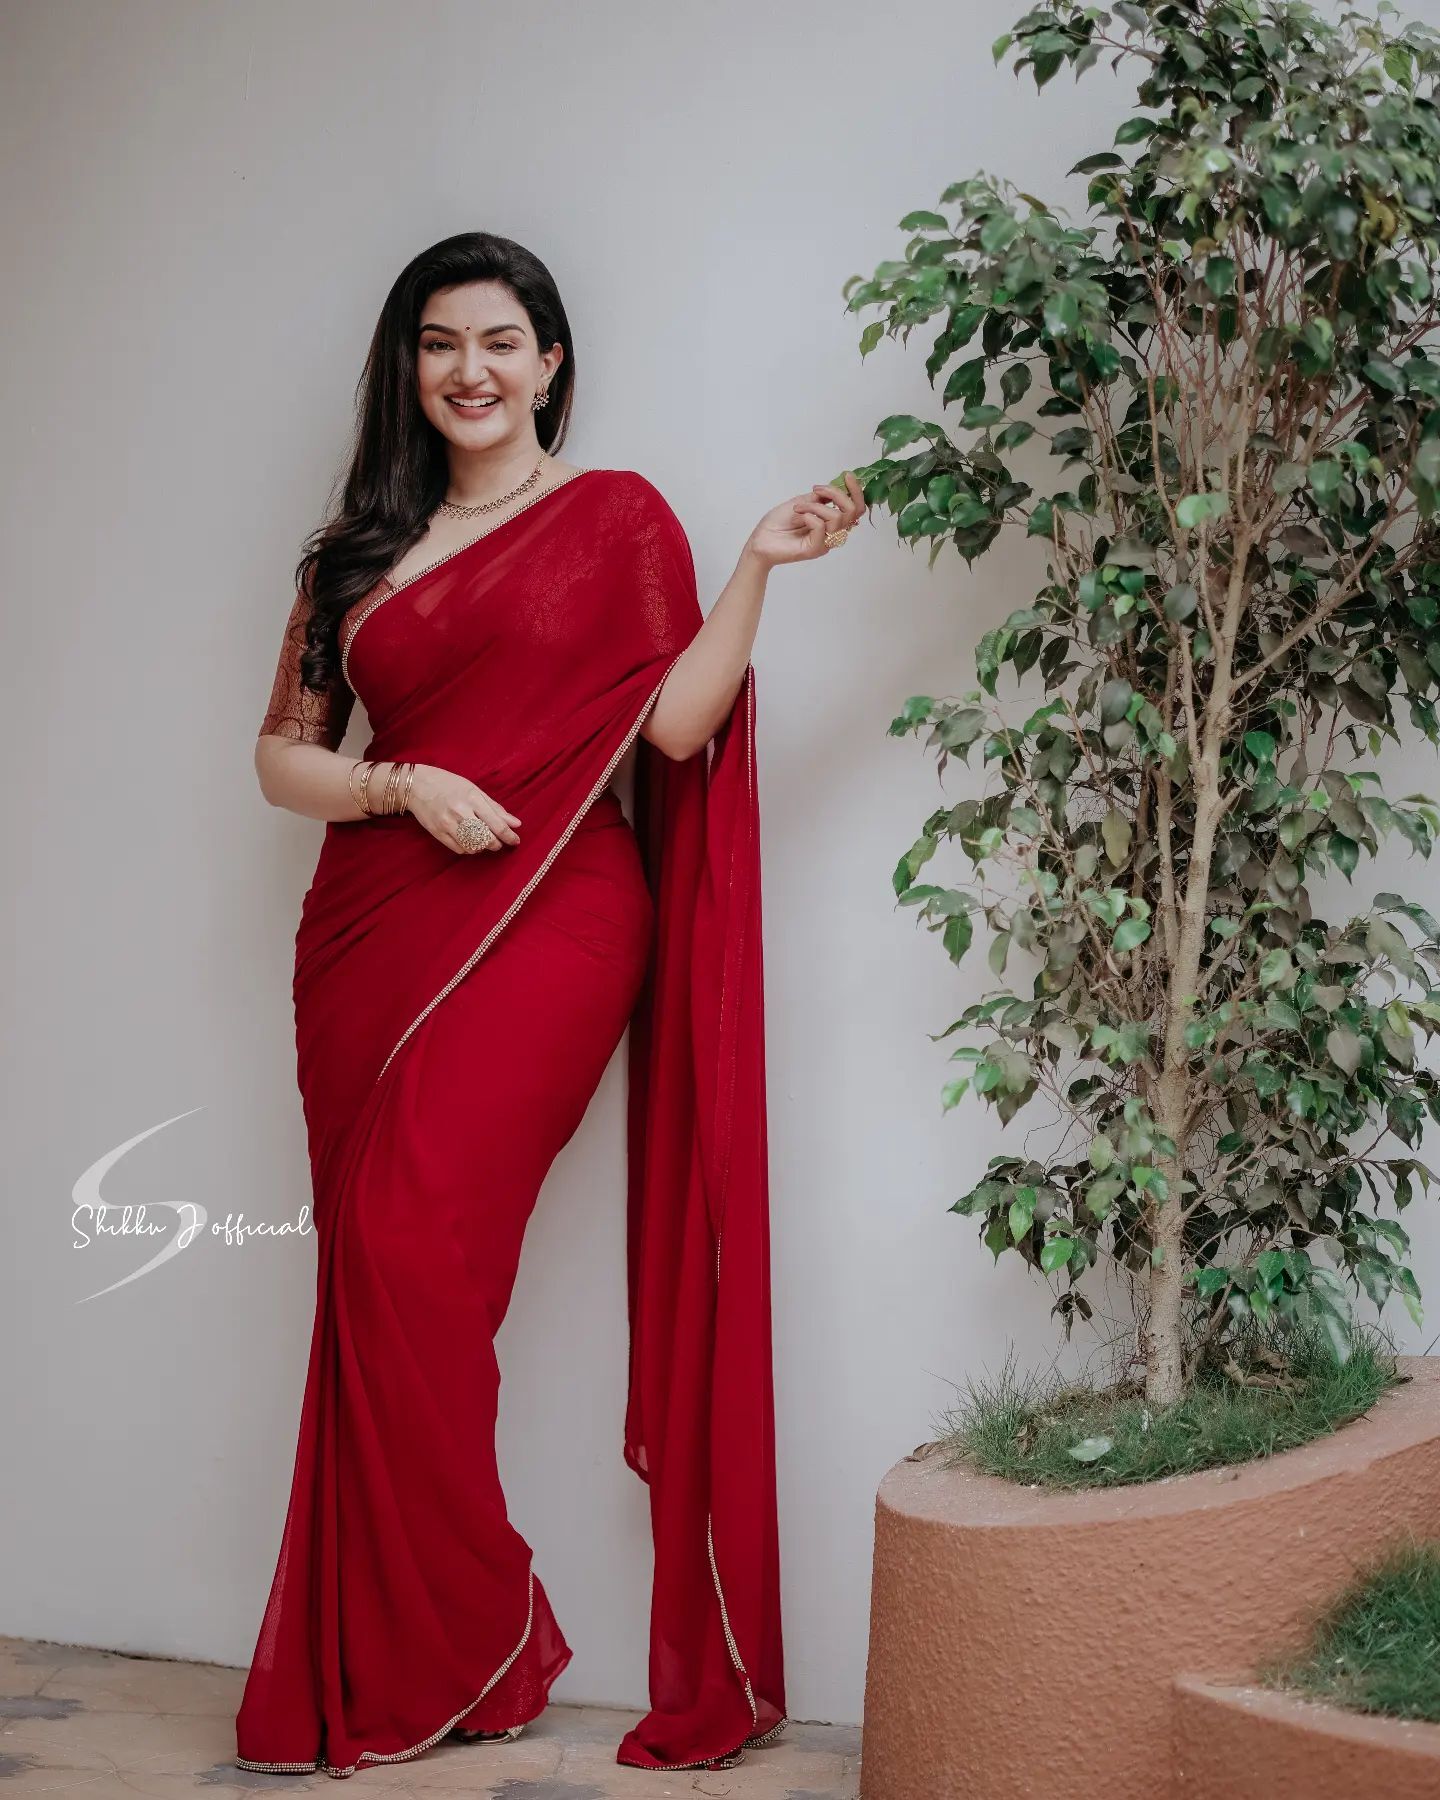 Srushti Dange Sex Photo - Honey Rose In Traditional Outfits And Looks - K4 Fashion